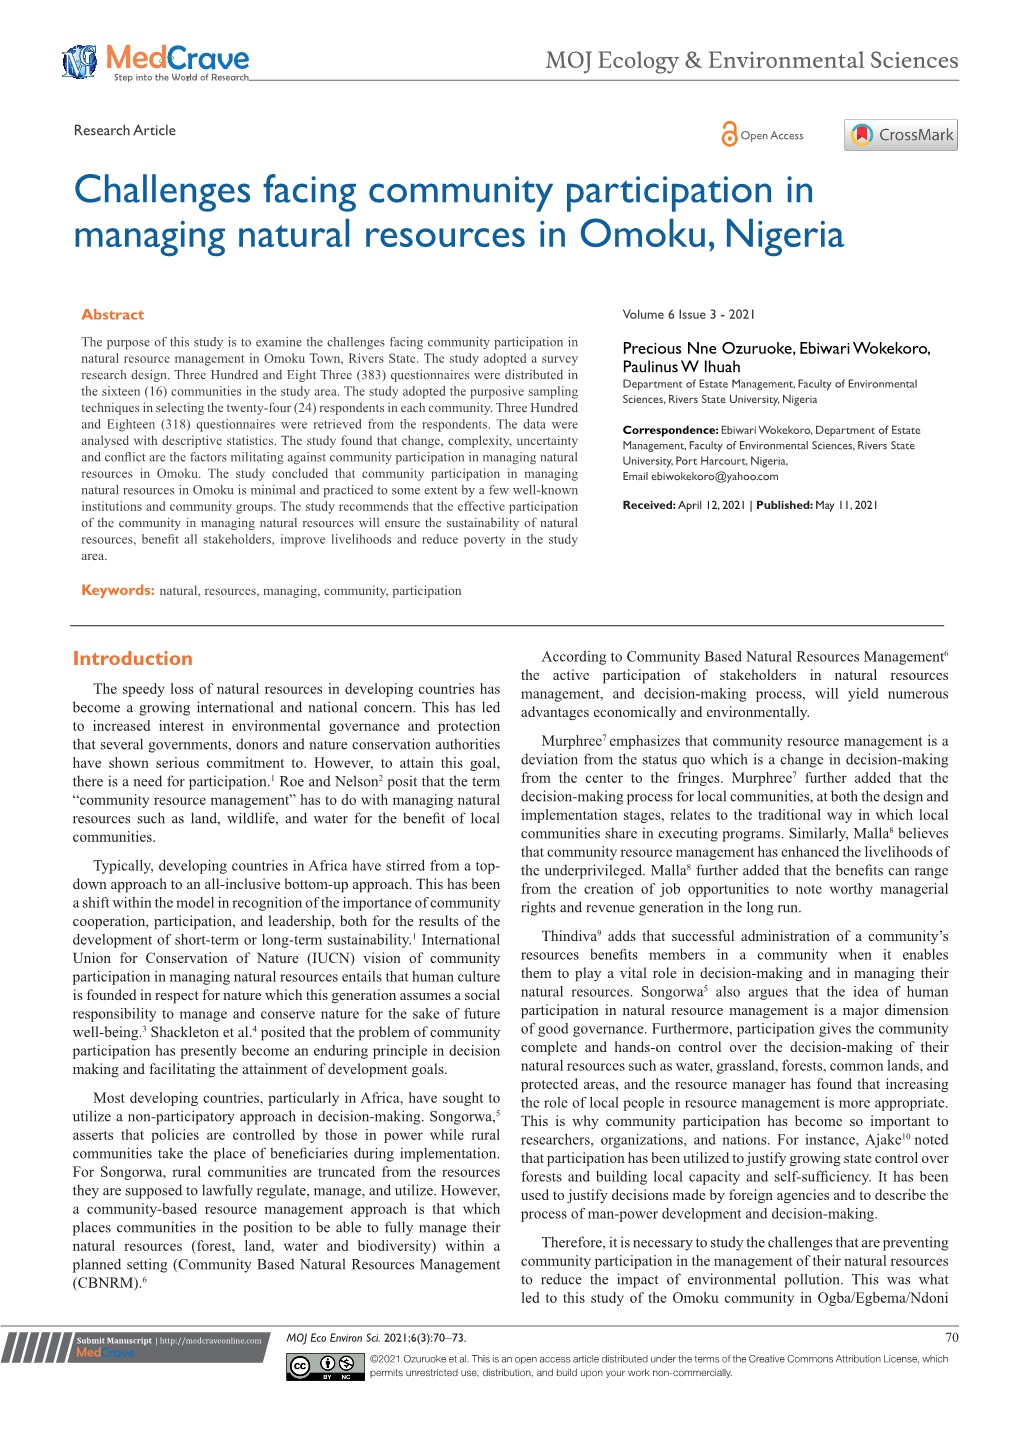 Challenges Facing Community Participation in Managing Natural Resources in Omoku, Nigeria